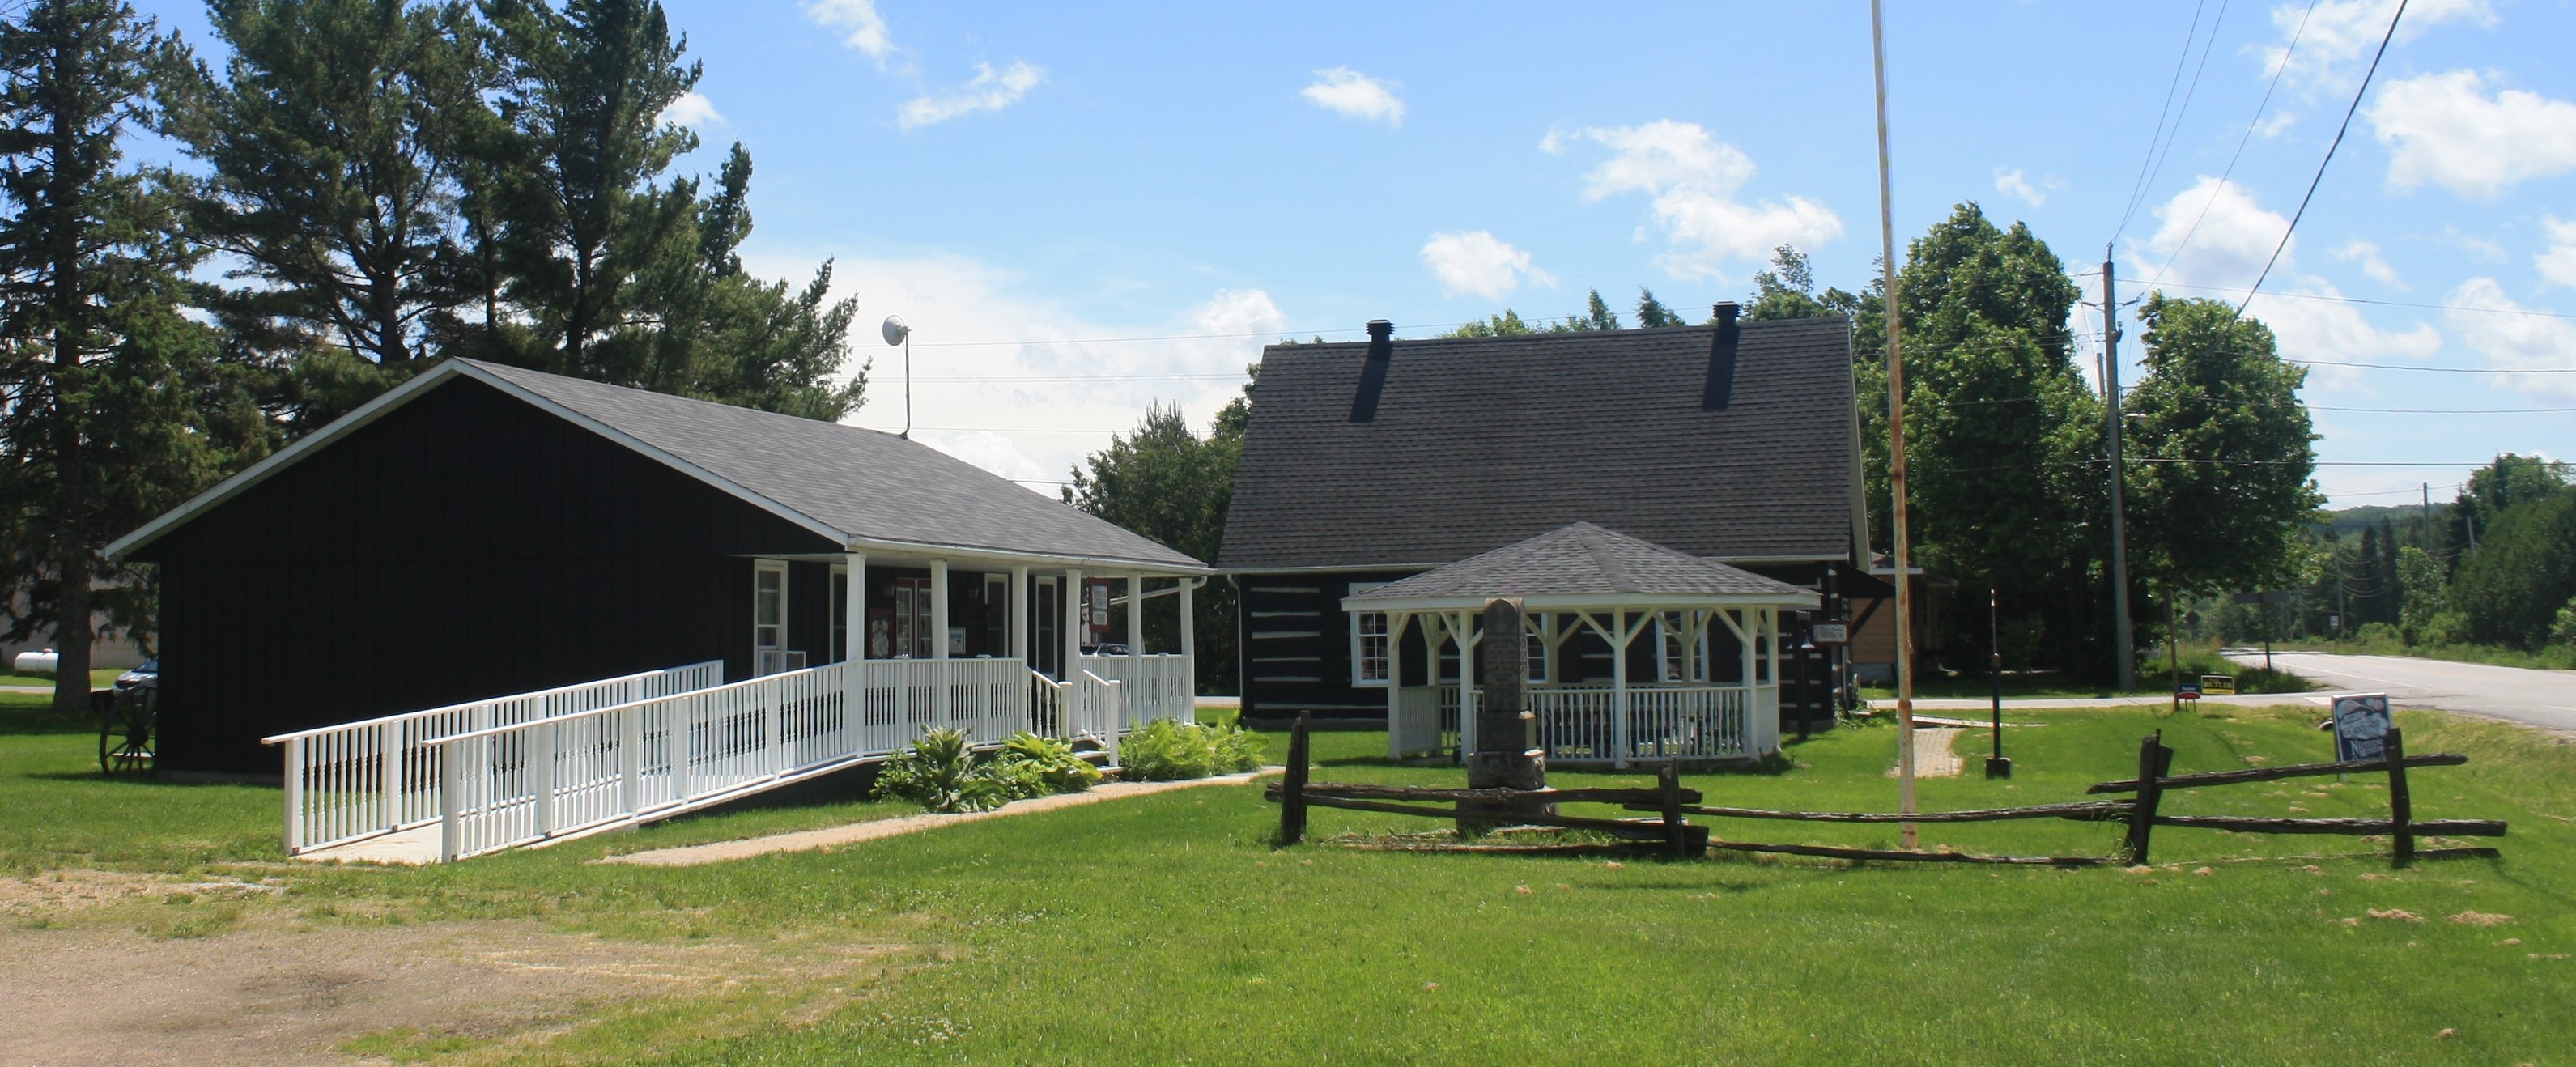 Three structures at the Nipissing Township Museum; the Gift Shop, the gazebo and the church building on a sunny summer day.